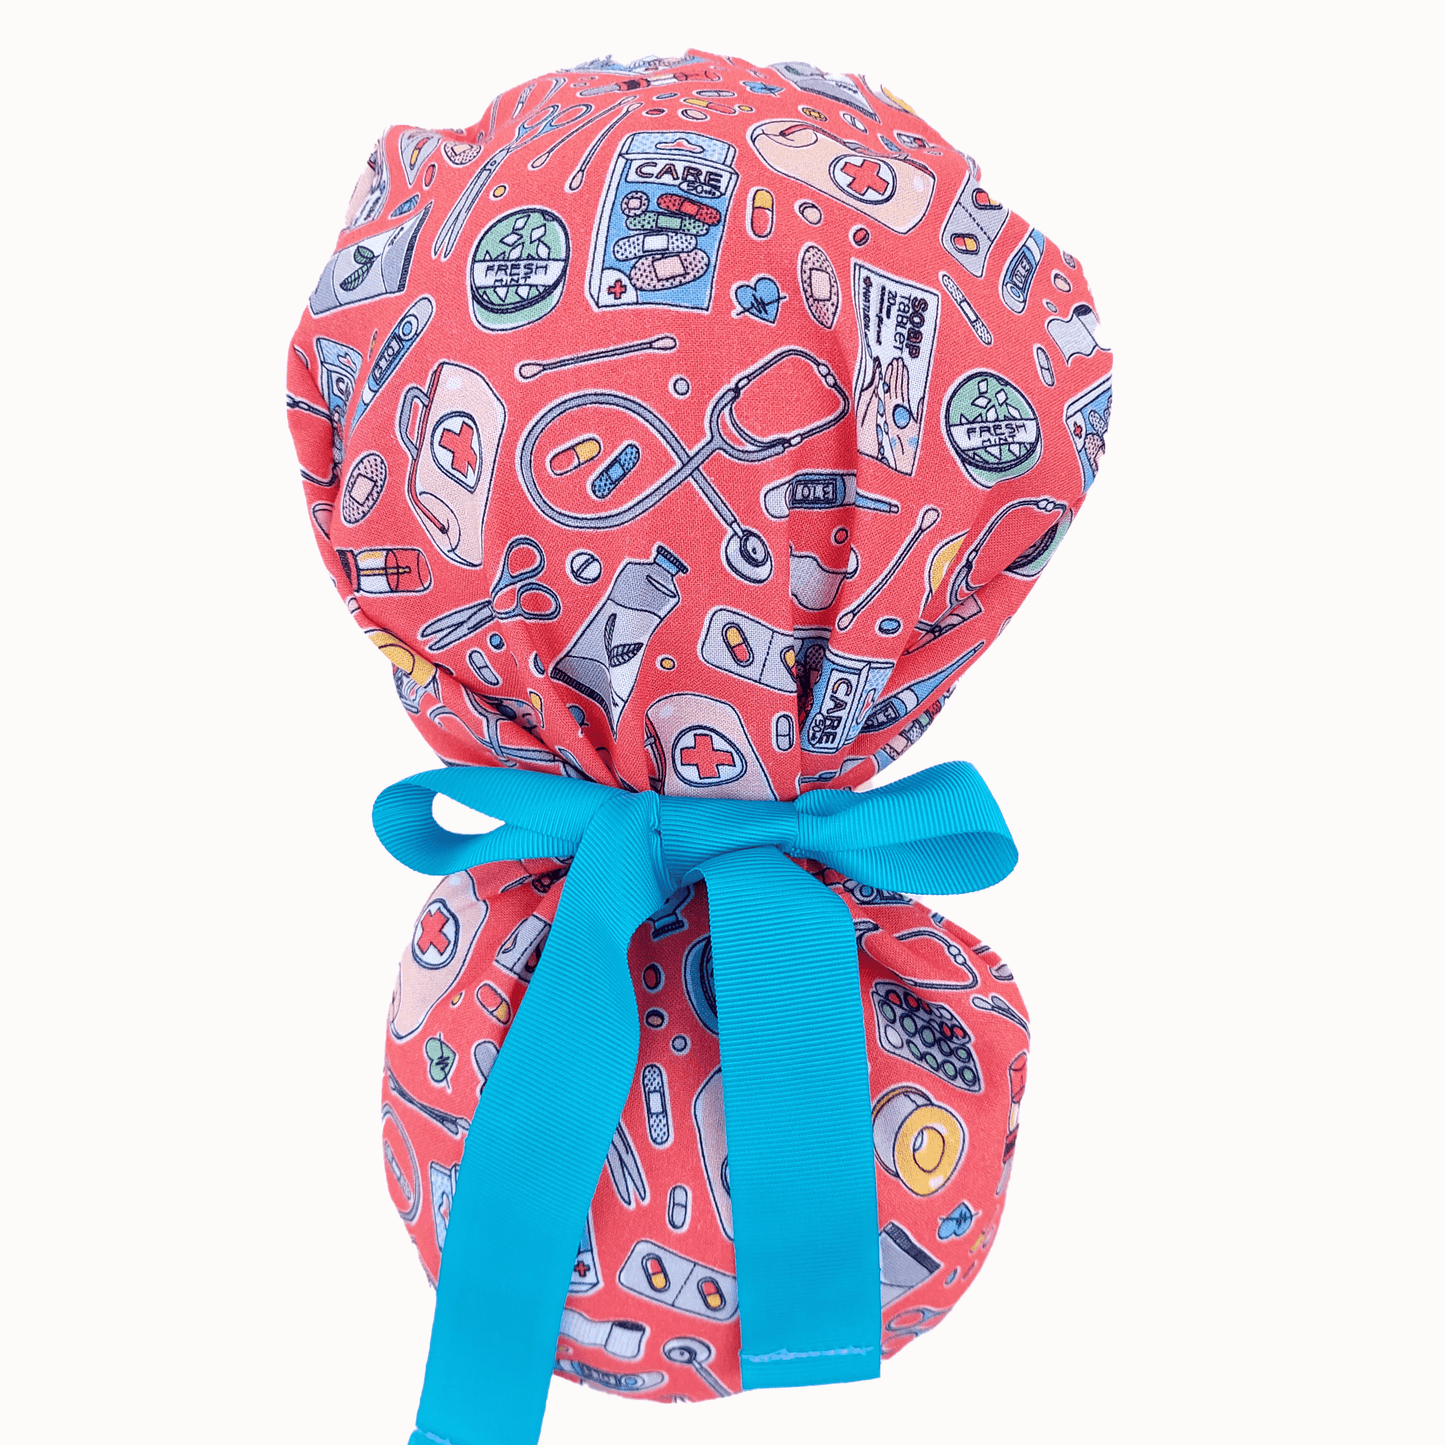 Everyday Heroes-Store Ponytail Scrub Cap medicines print, surgical cap for women with medium long hair. This is the perfect accessory for Healthcare workers, Hospitals, Doctors, Nurses, Dentists, Veterinarians, Labs, Chefs and many others.